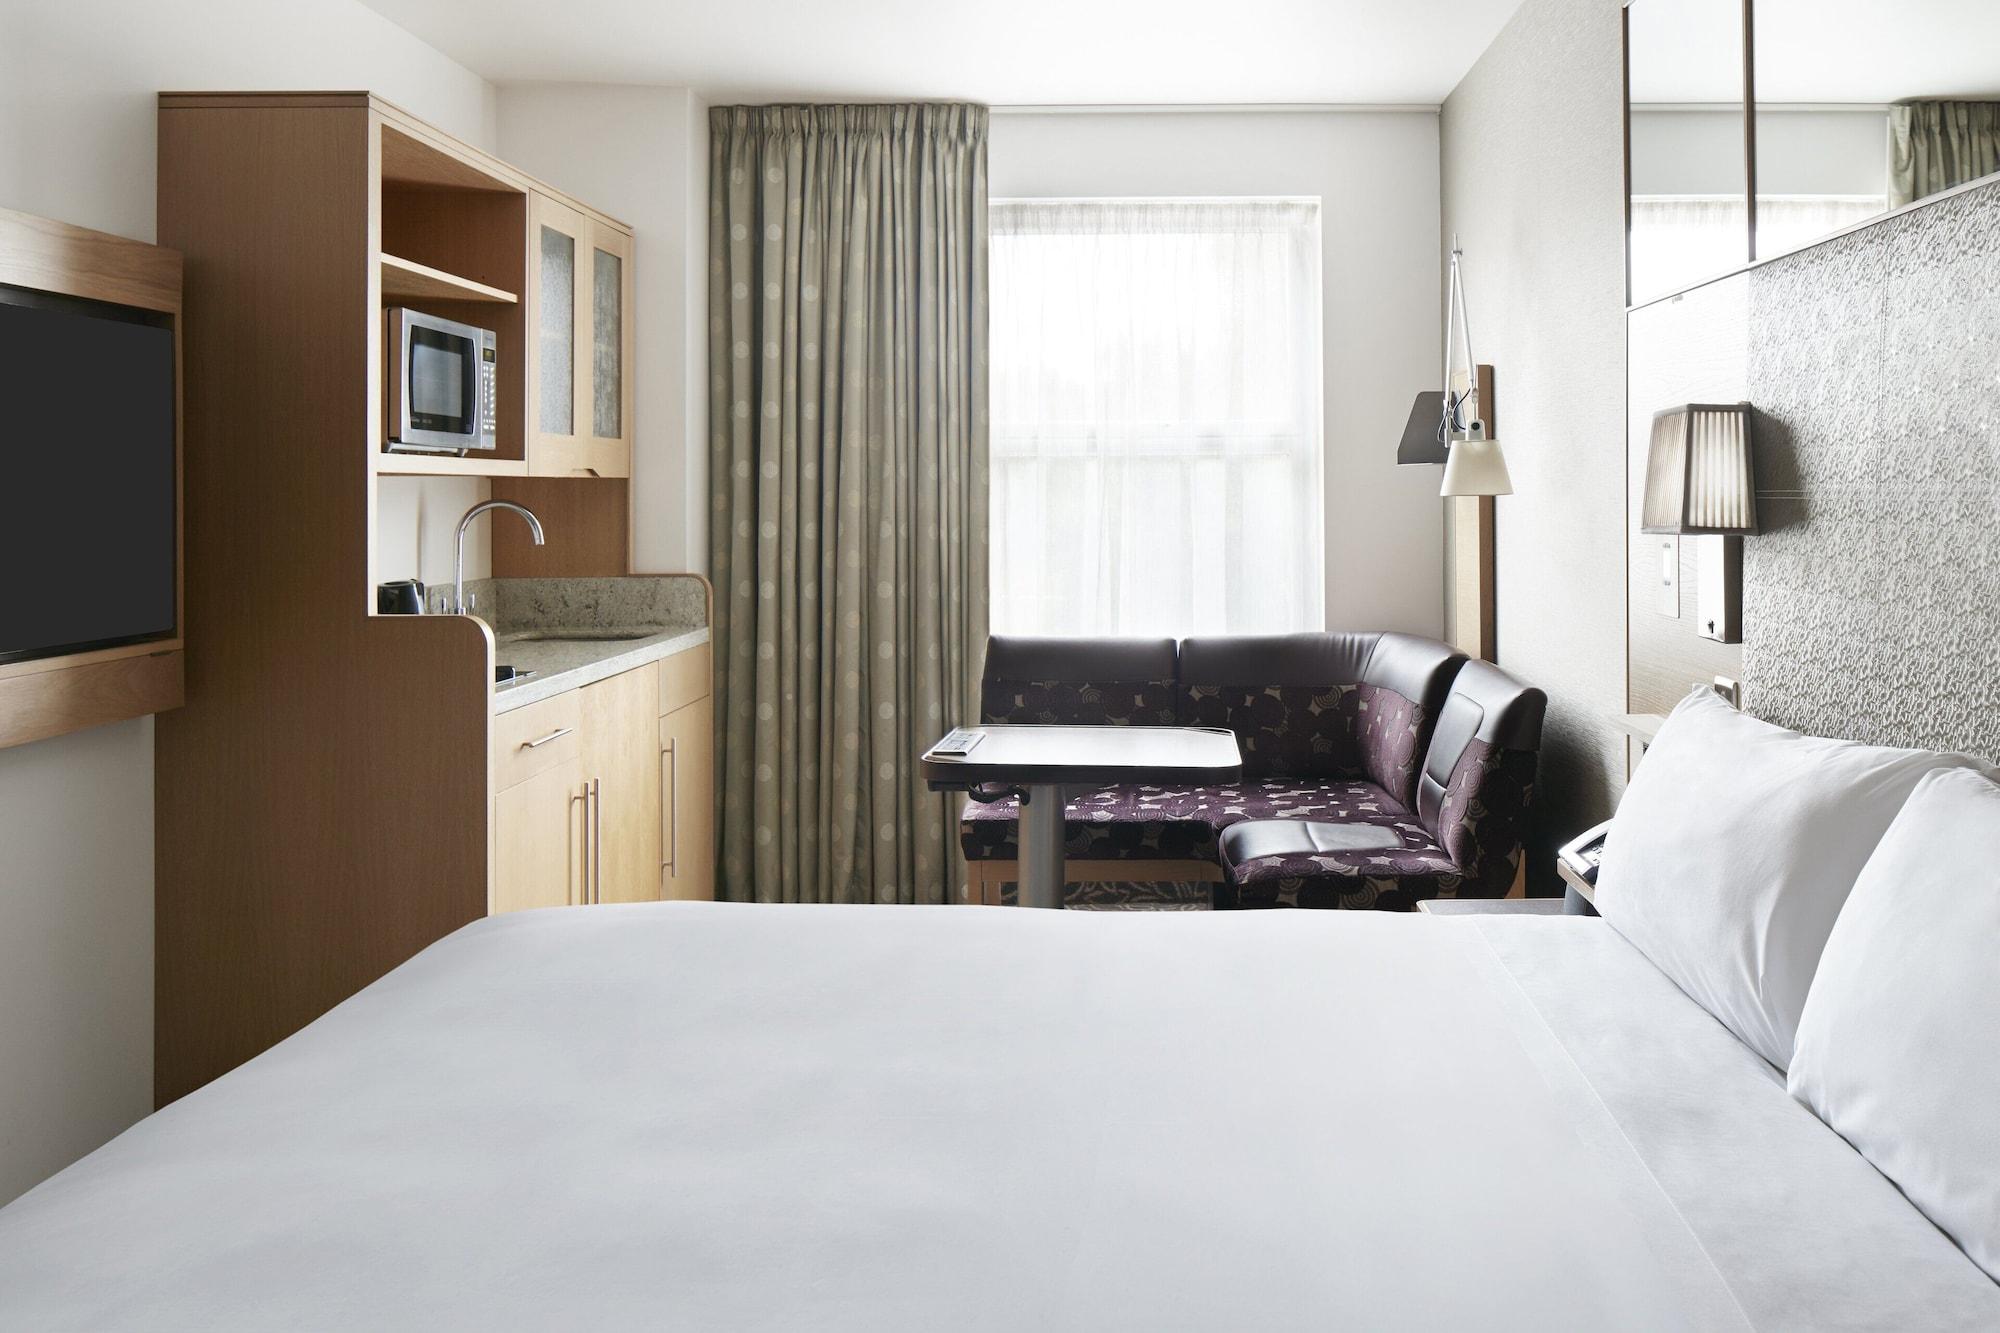 CLUB QUARTERS HOTEL COVENT GARDEN HOLBORN, LONDON 4* (United Kingdom) -  from £ 163 | HOTELMIX